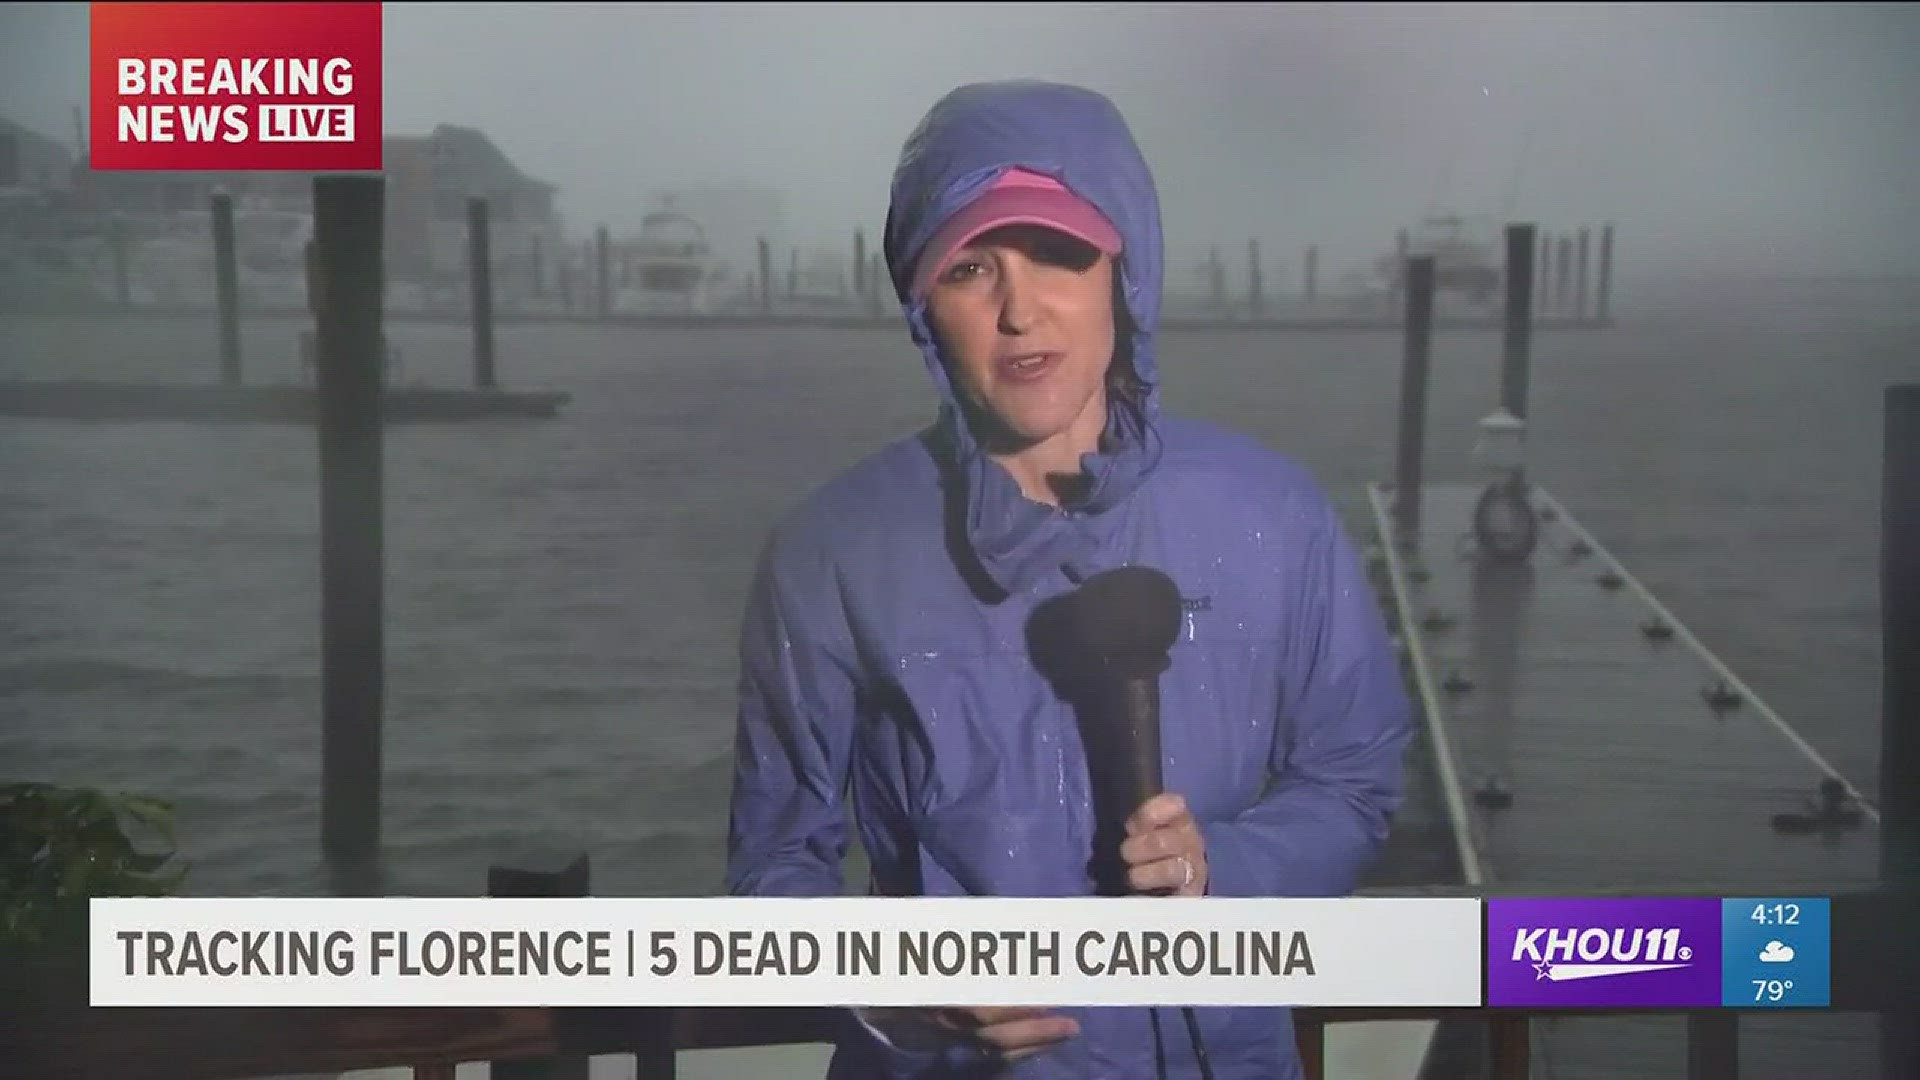 Now that Hurricane Florence has made landfall, heavy rain and storm surge are big concerns. Courtney Zubowski is in Wilmington, NC where roads are flooding.